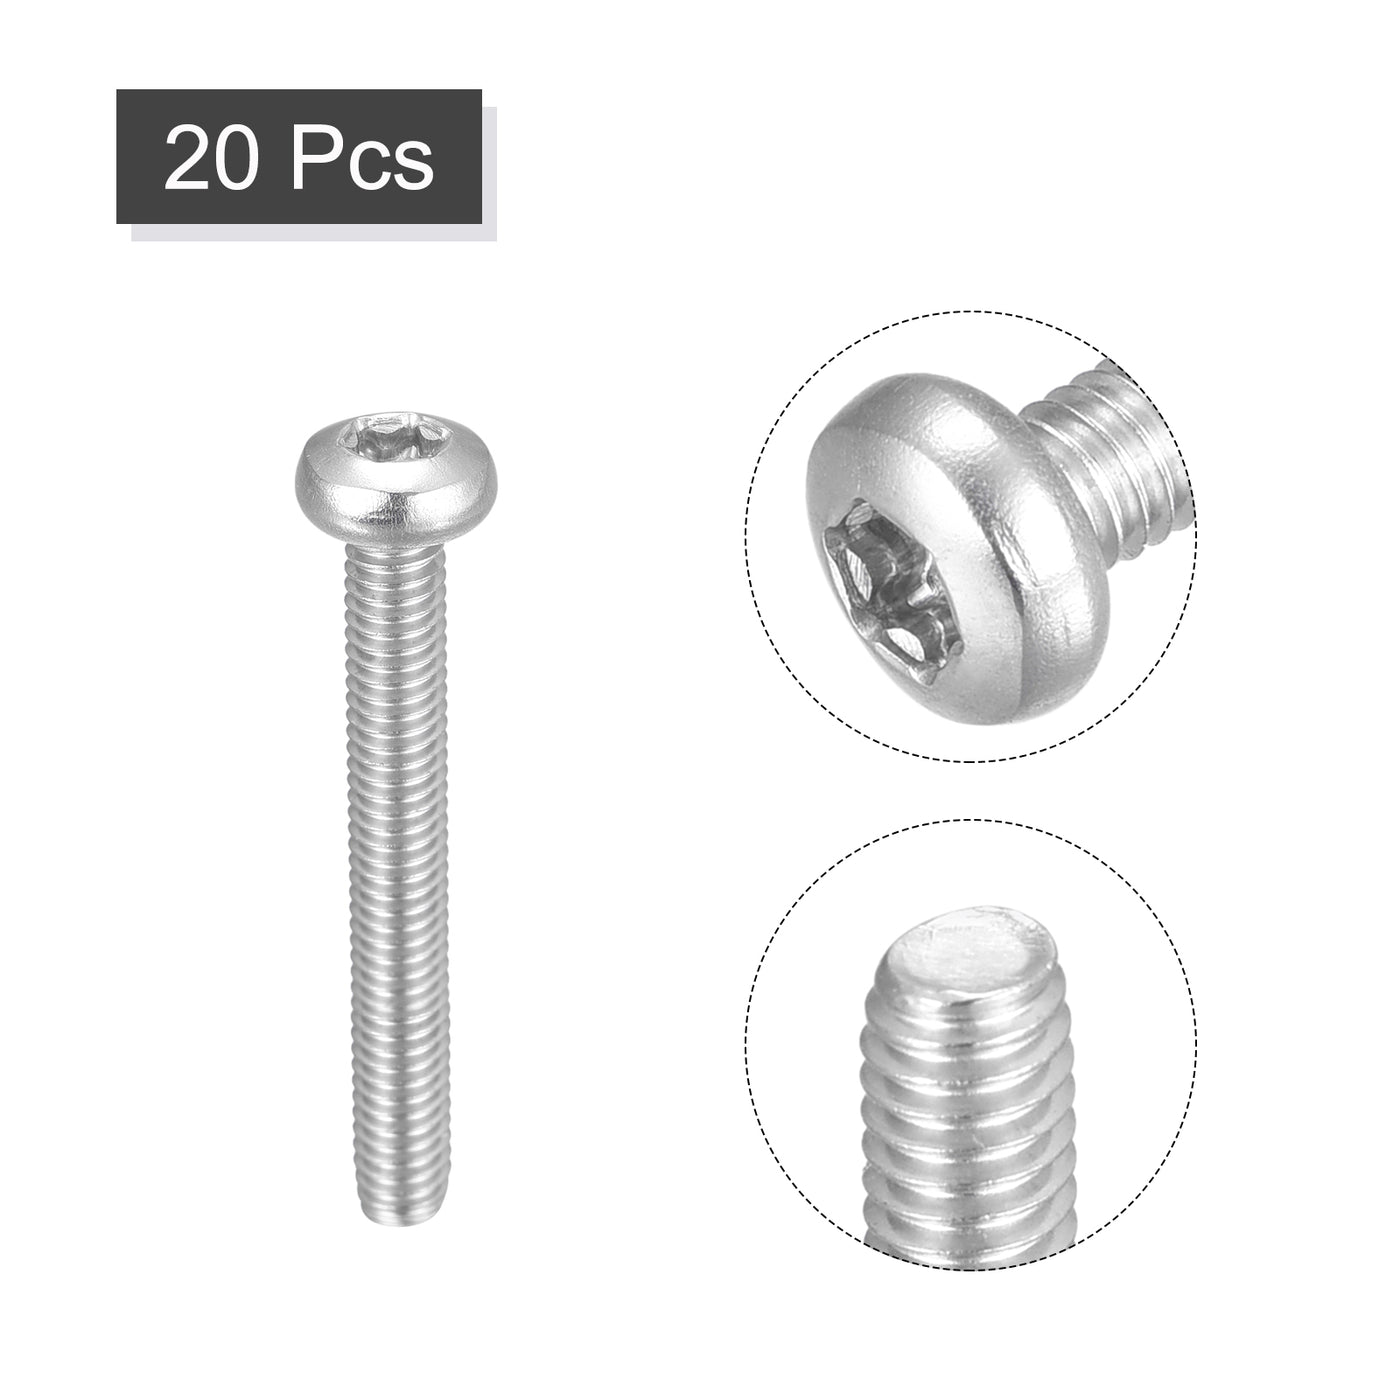 uxcell Uxcell M4x35mm Torx Security Machine Screws, 20pcs 316 Stainless Steel Pan Head Screw